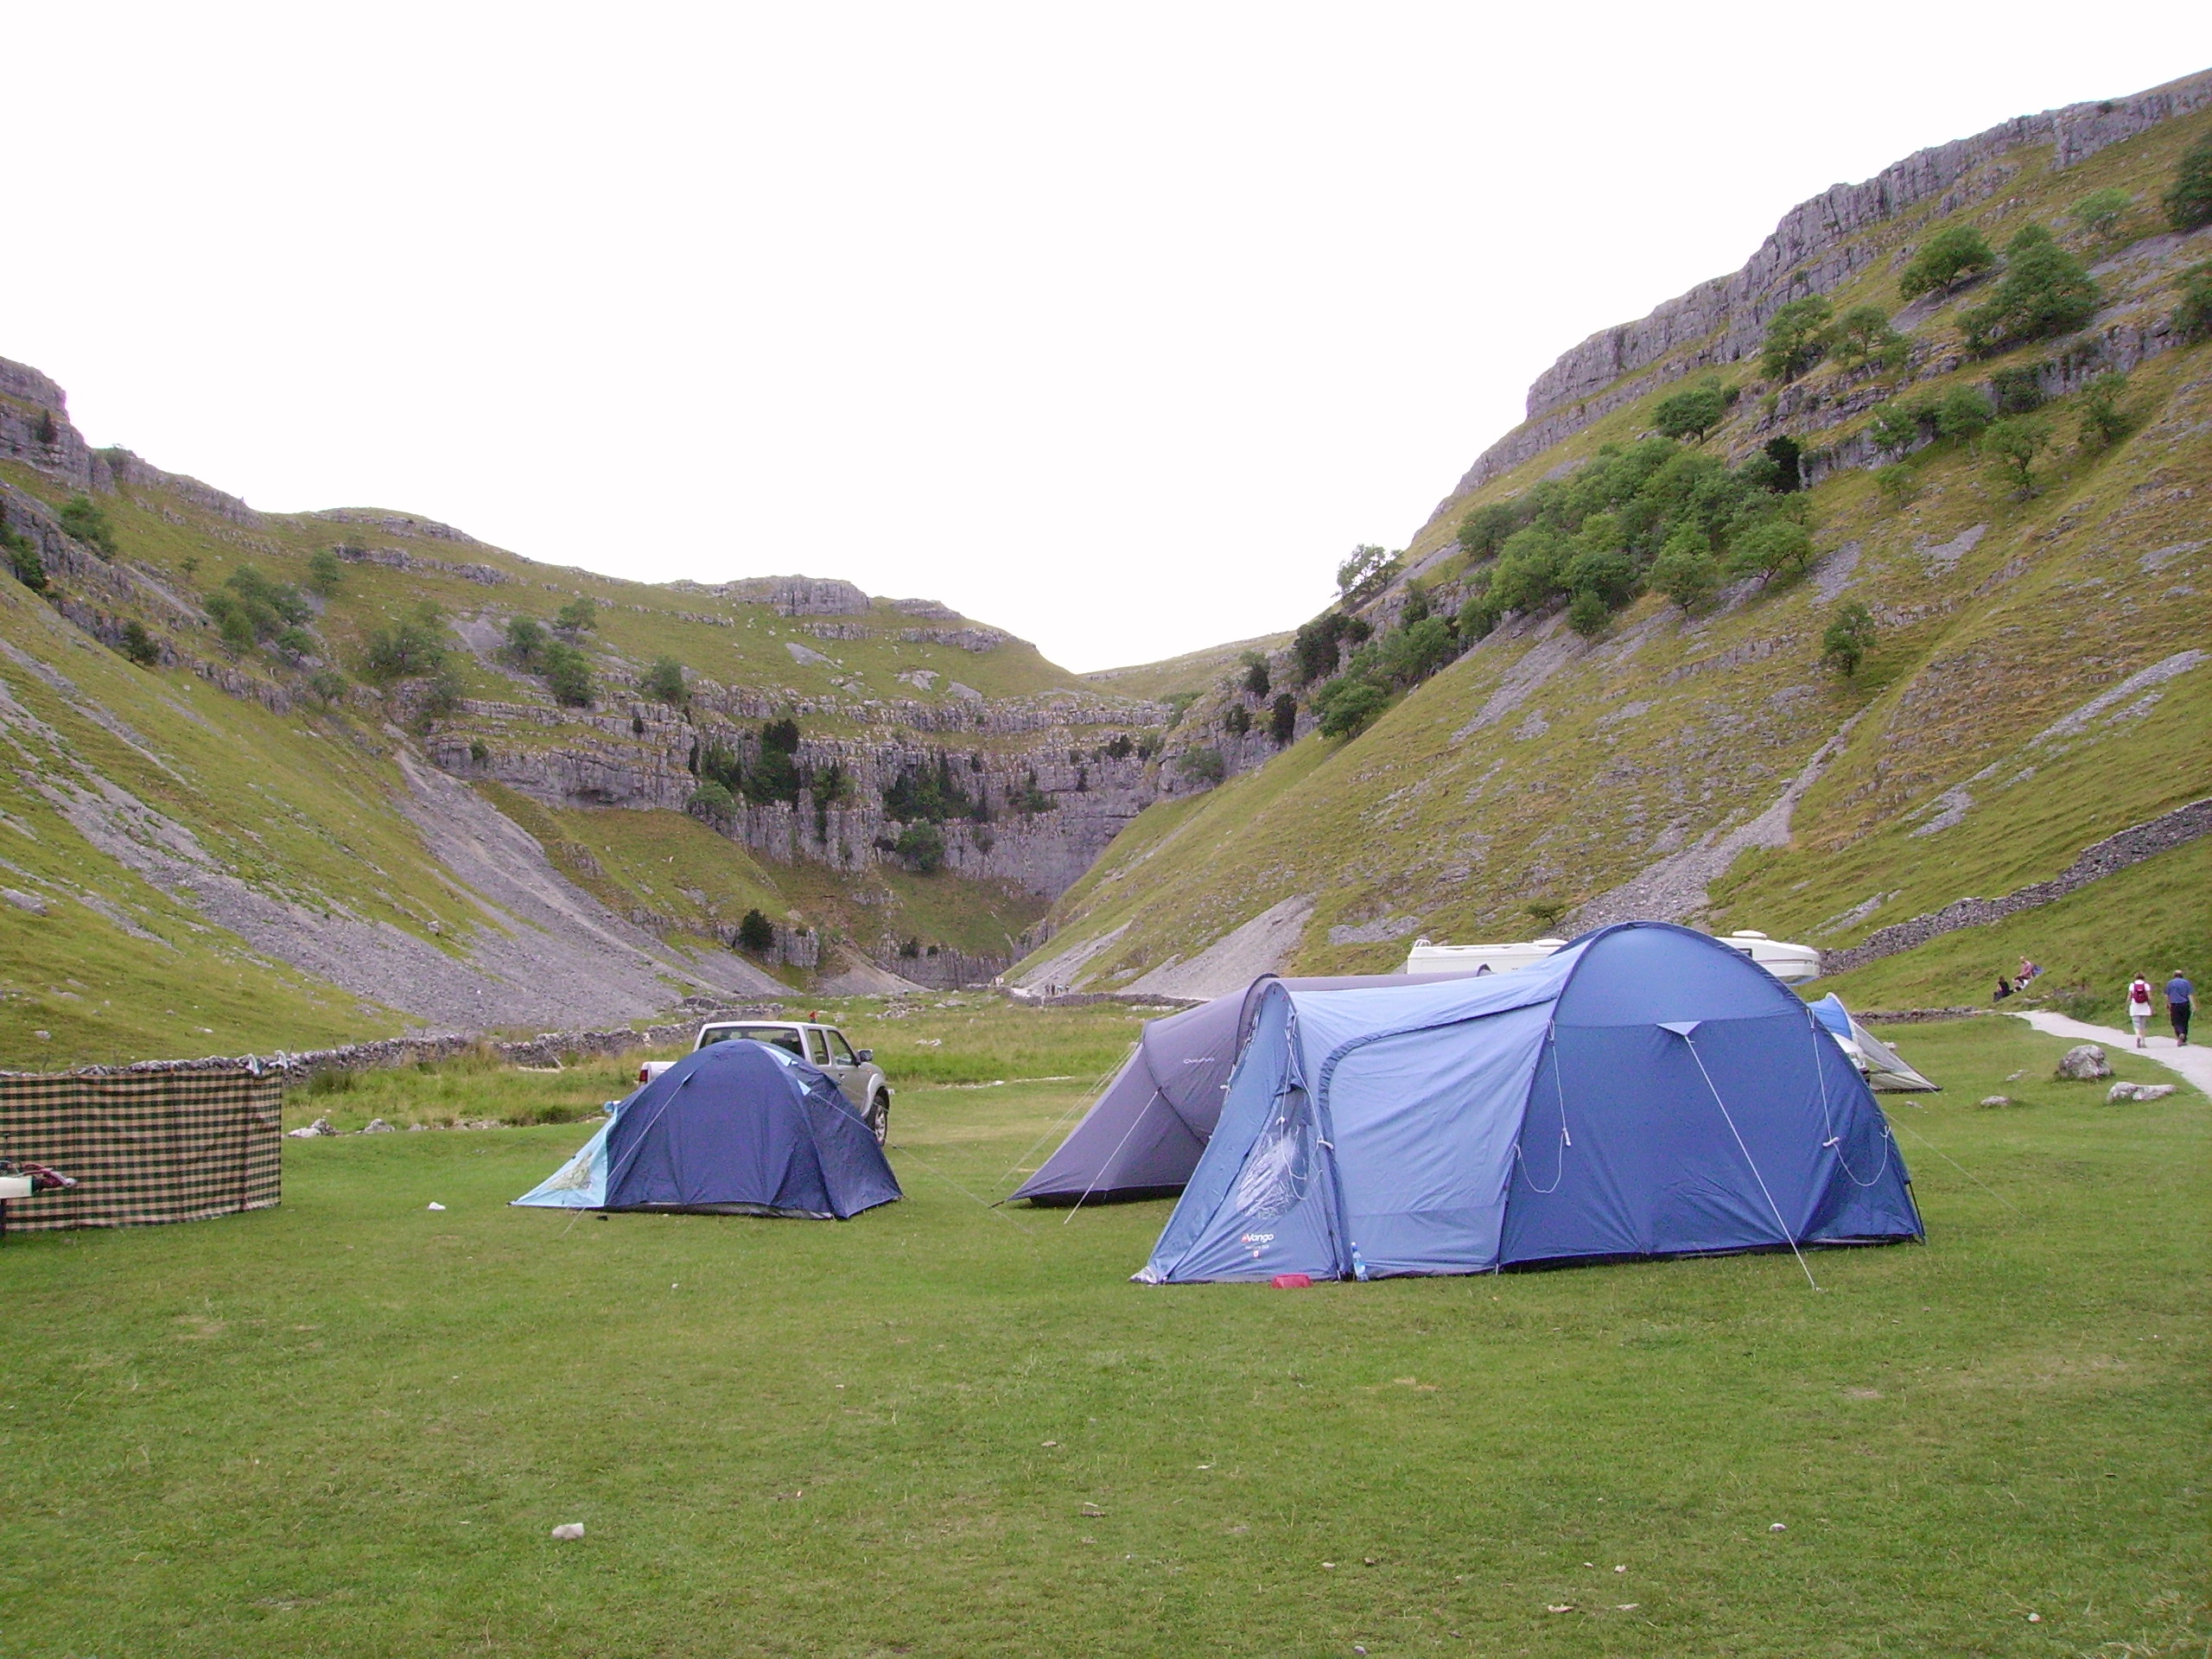 File:Gordale camping site.JPG - Wikimedia Commons